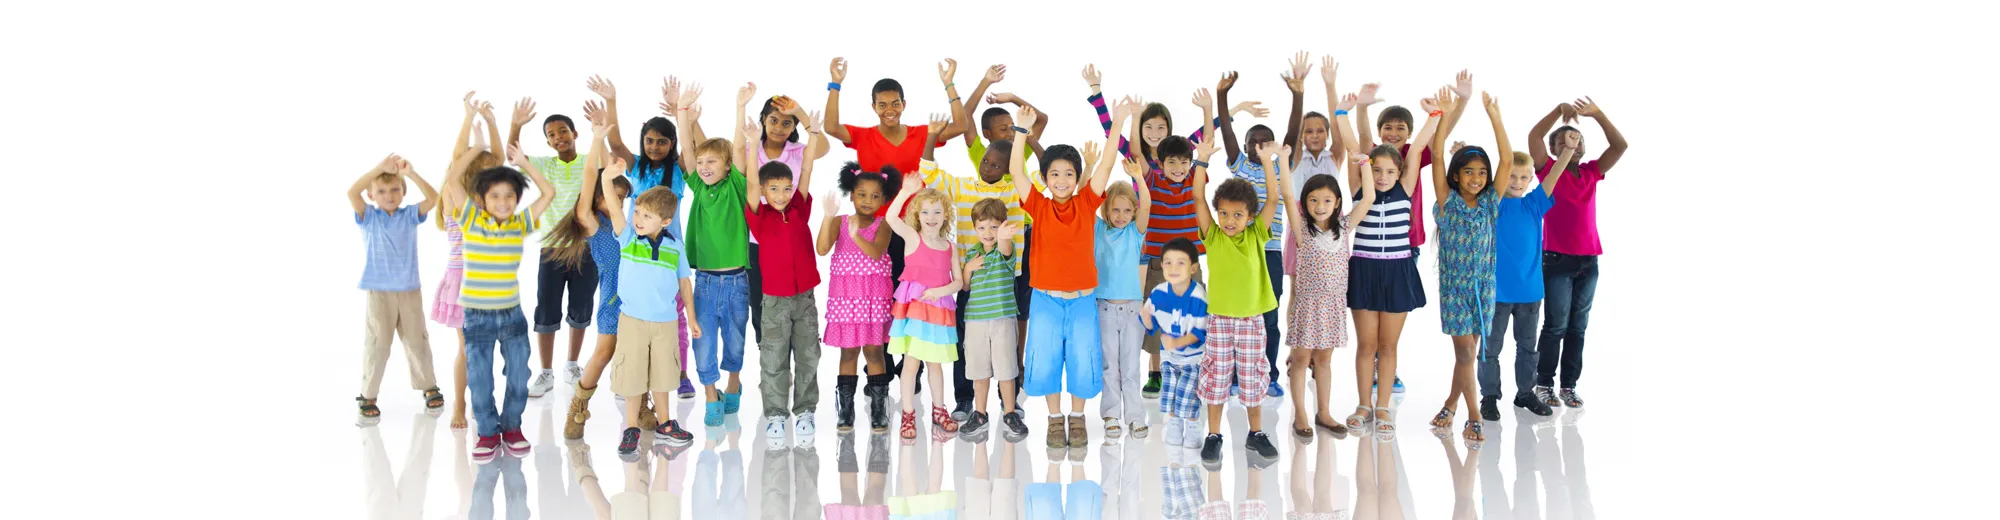 Group photo of children holding their hands up